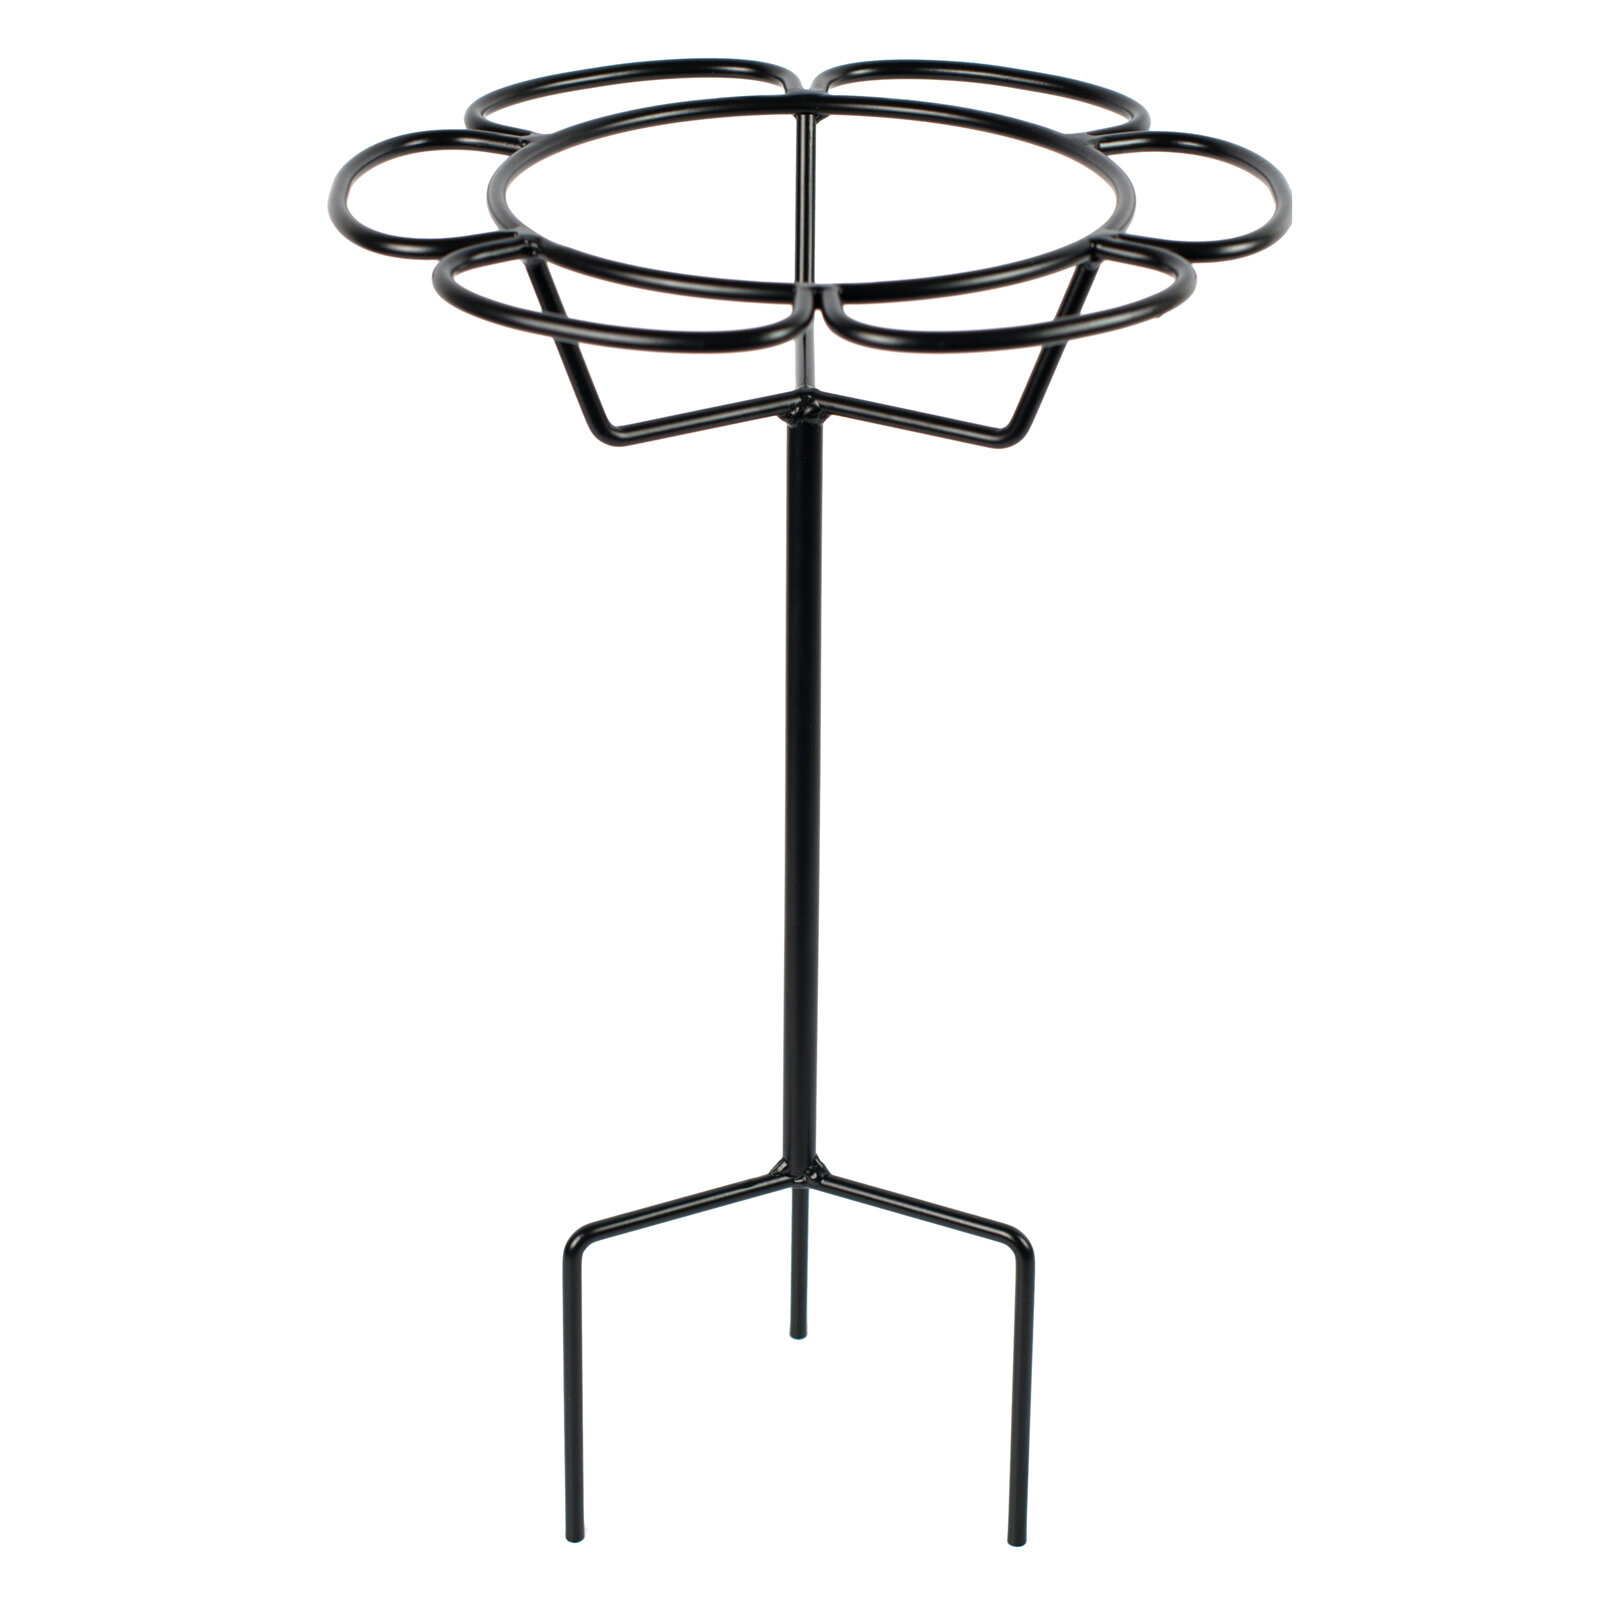 Ozzie Daisy Ground Plant Stand Arlmont & Co.